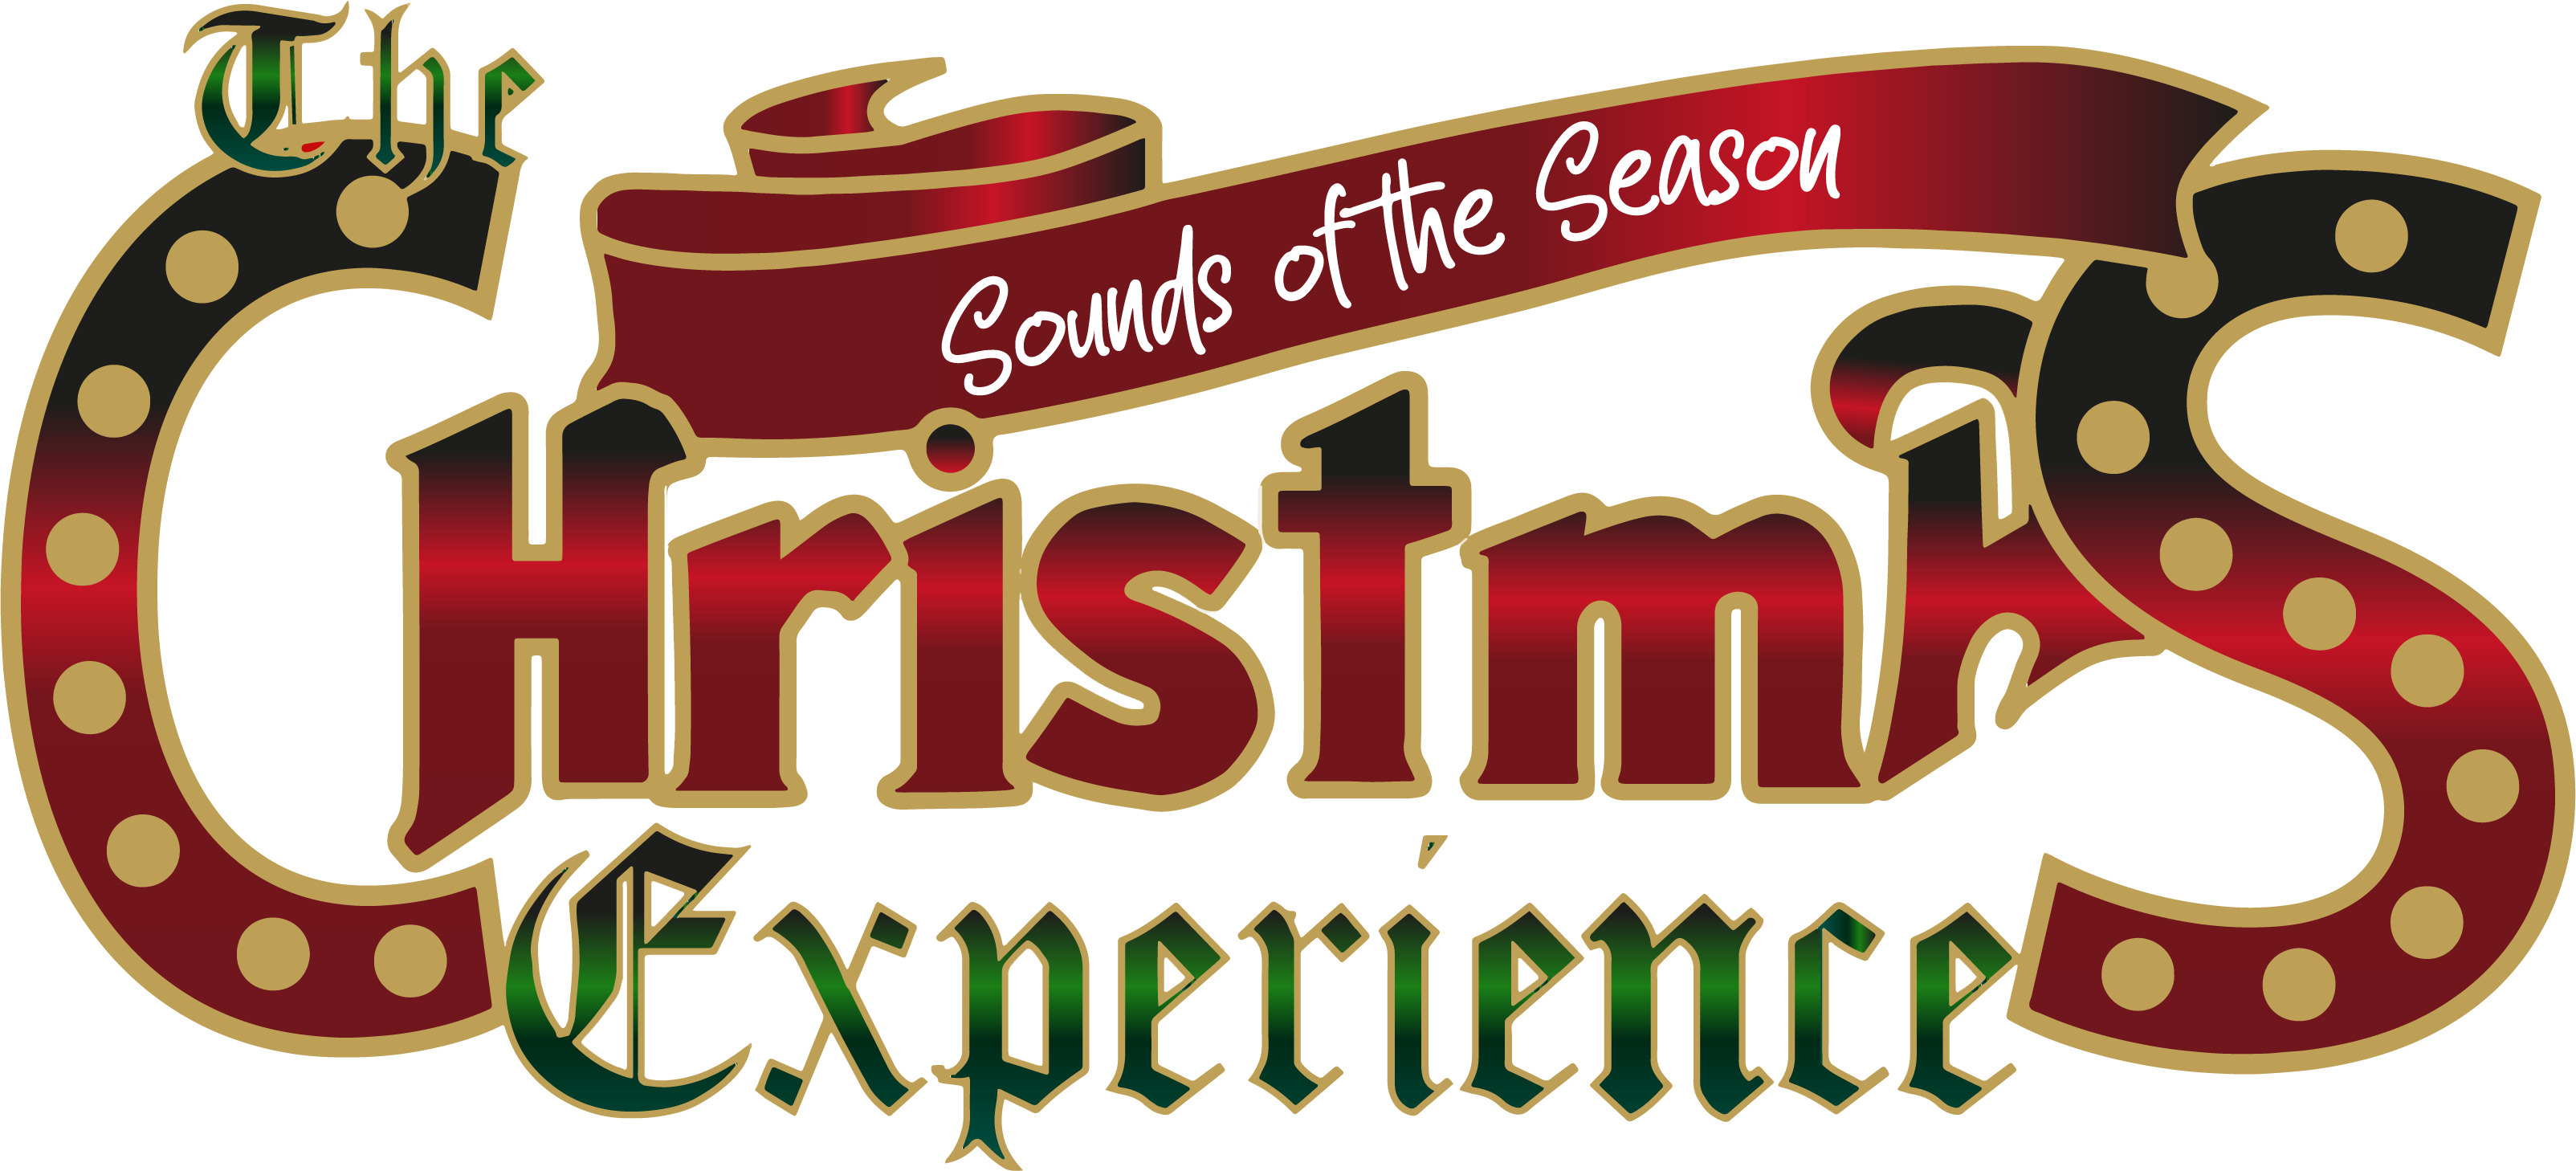 The Christmas Experience